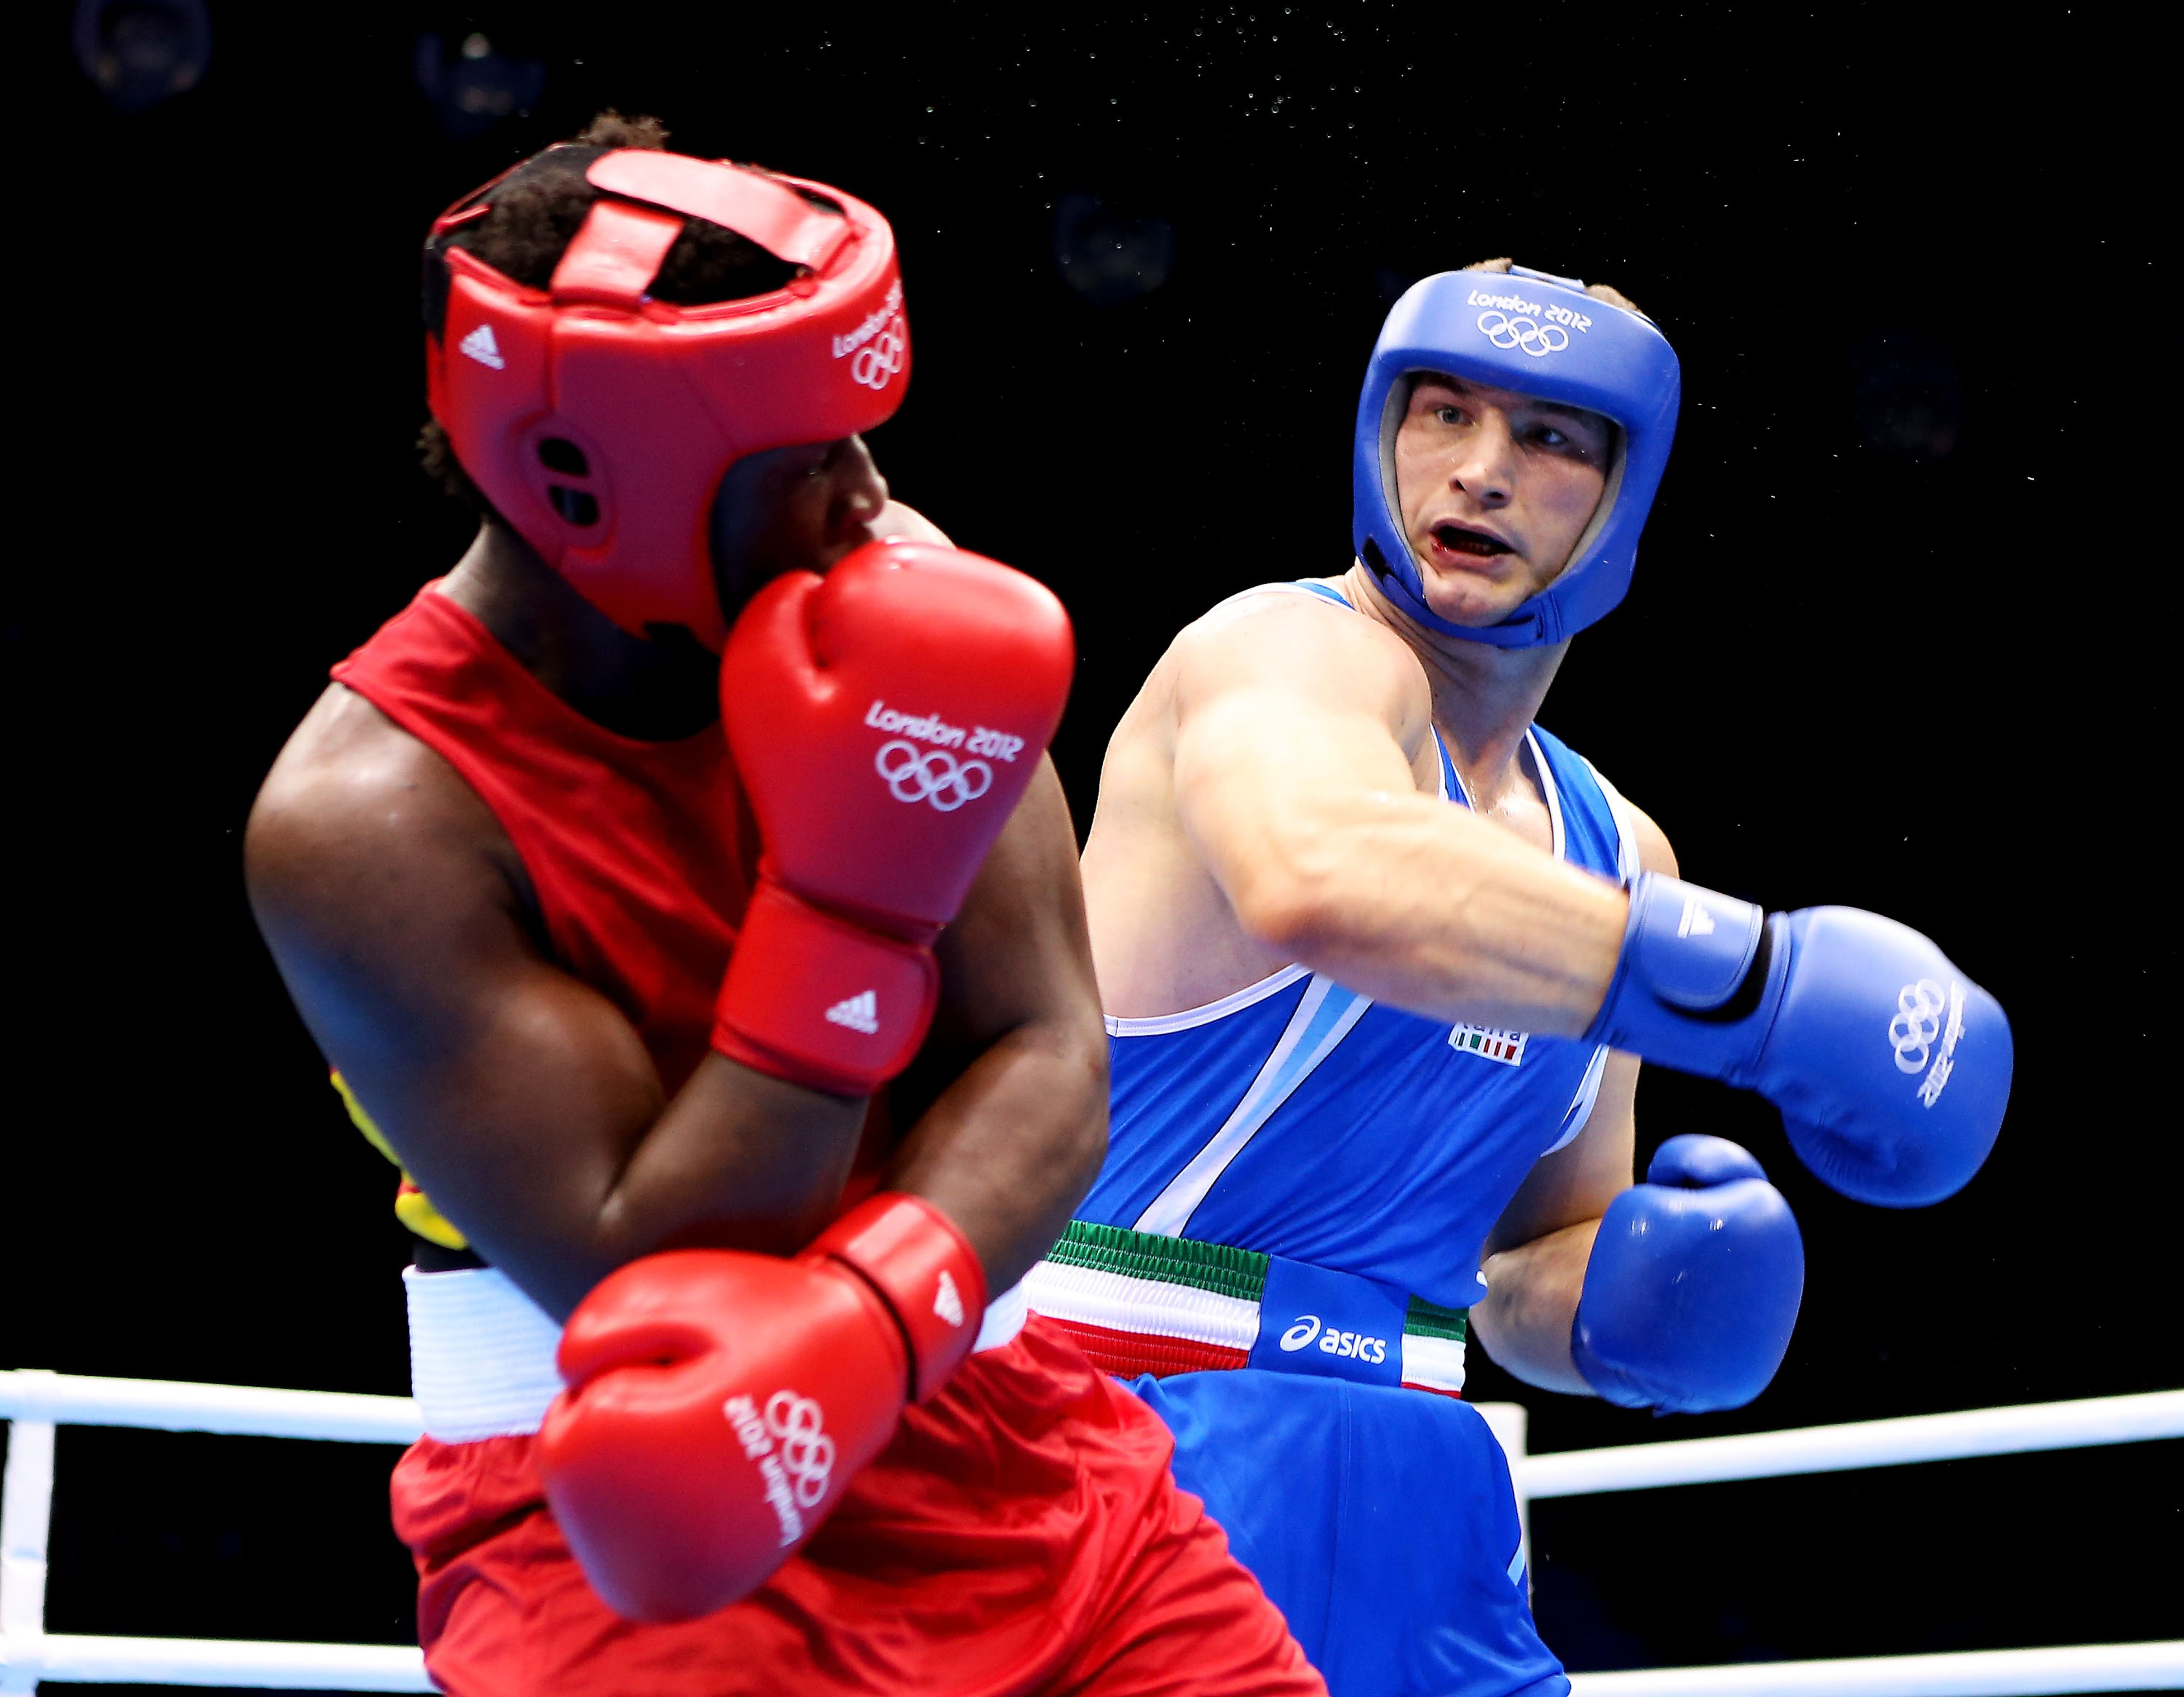 Roberto Cammarelle of Italy will have to beat Great Britain's Anthony Joshua if he is to pick up a second Olympic gold medal. (Photo by Scott Heavey/Getty Images)